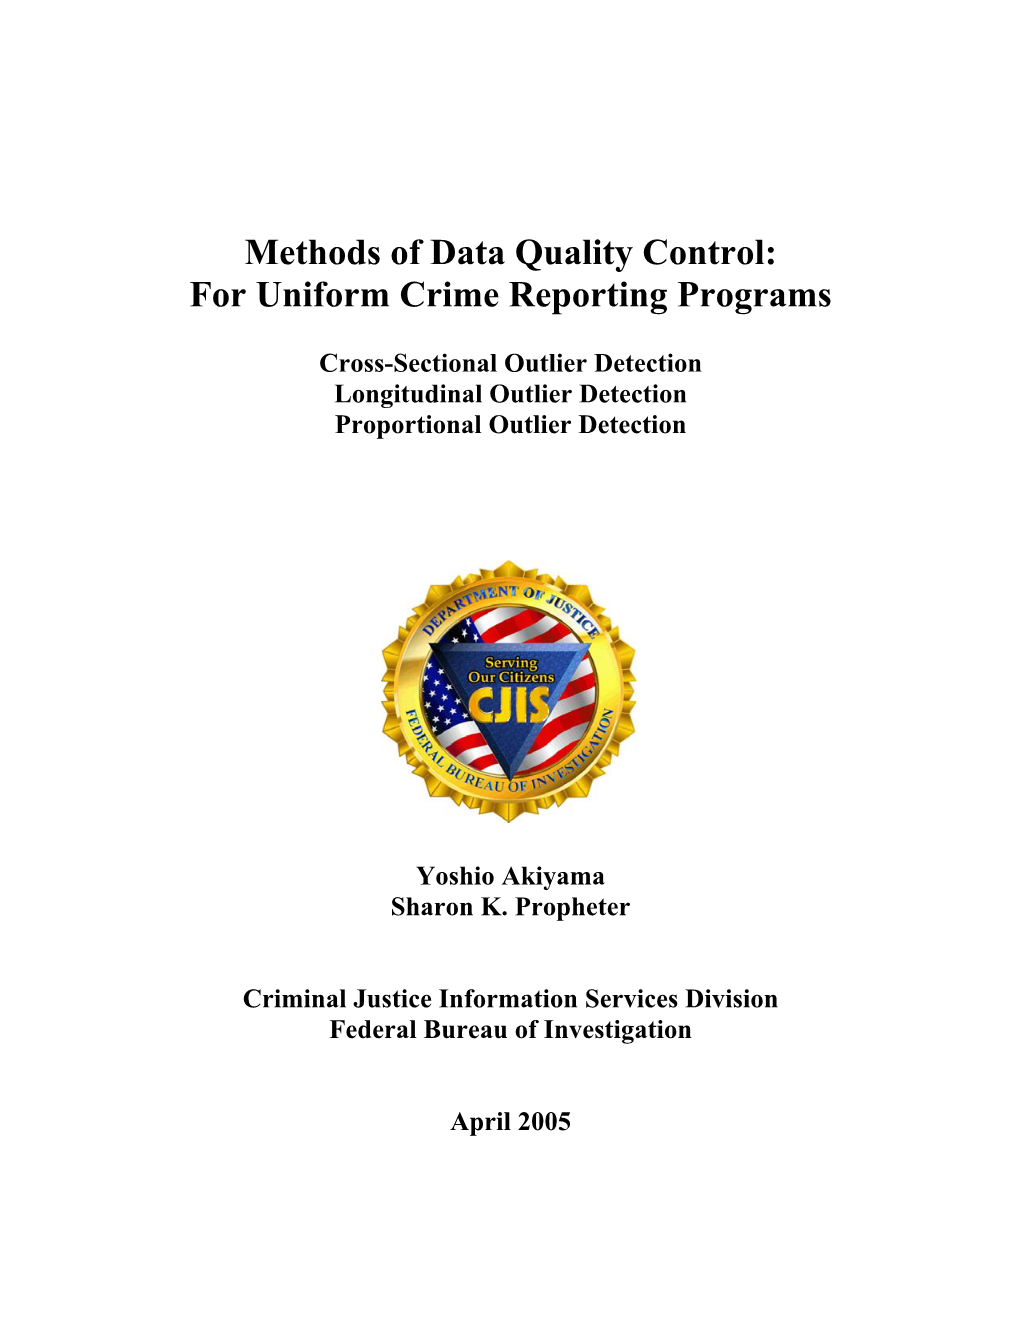 Methods of Data Quality Control: for Uniform Crime Reporting Programs